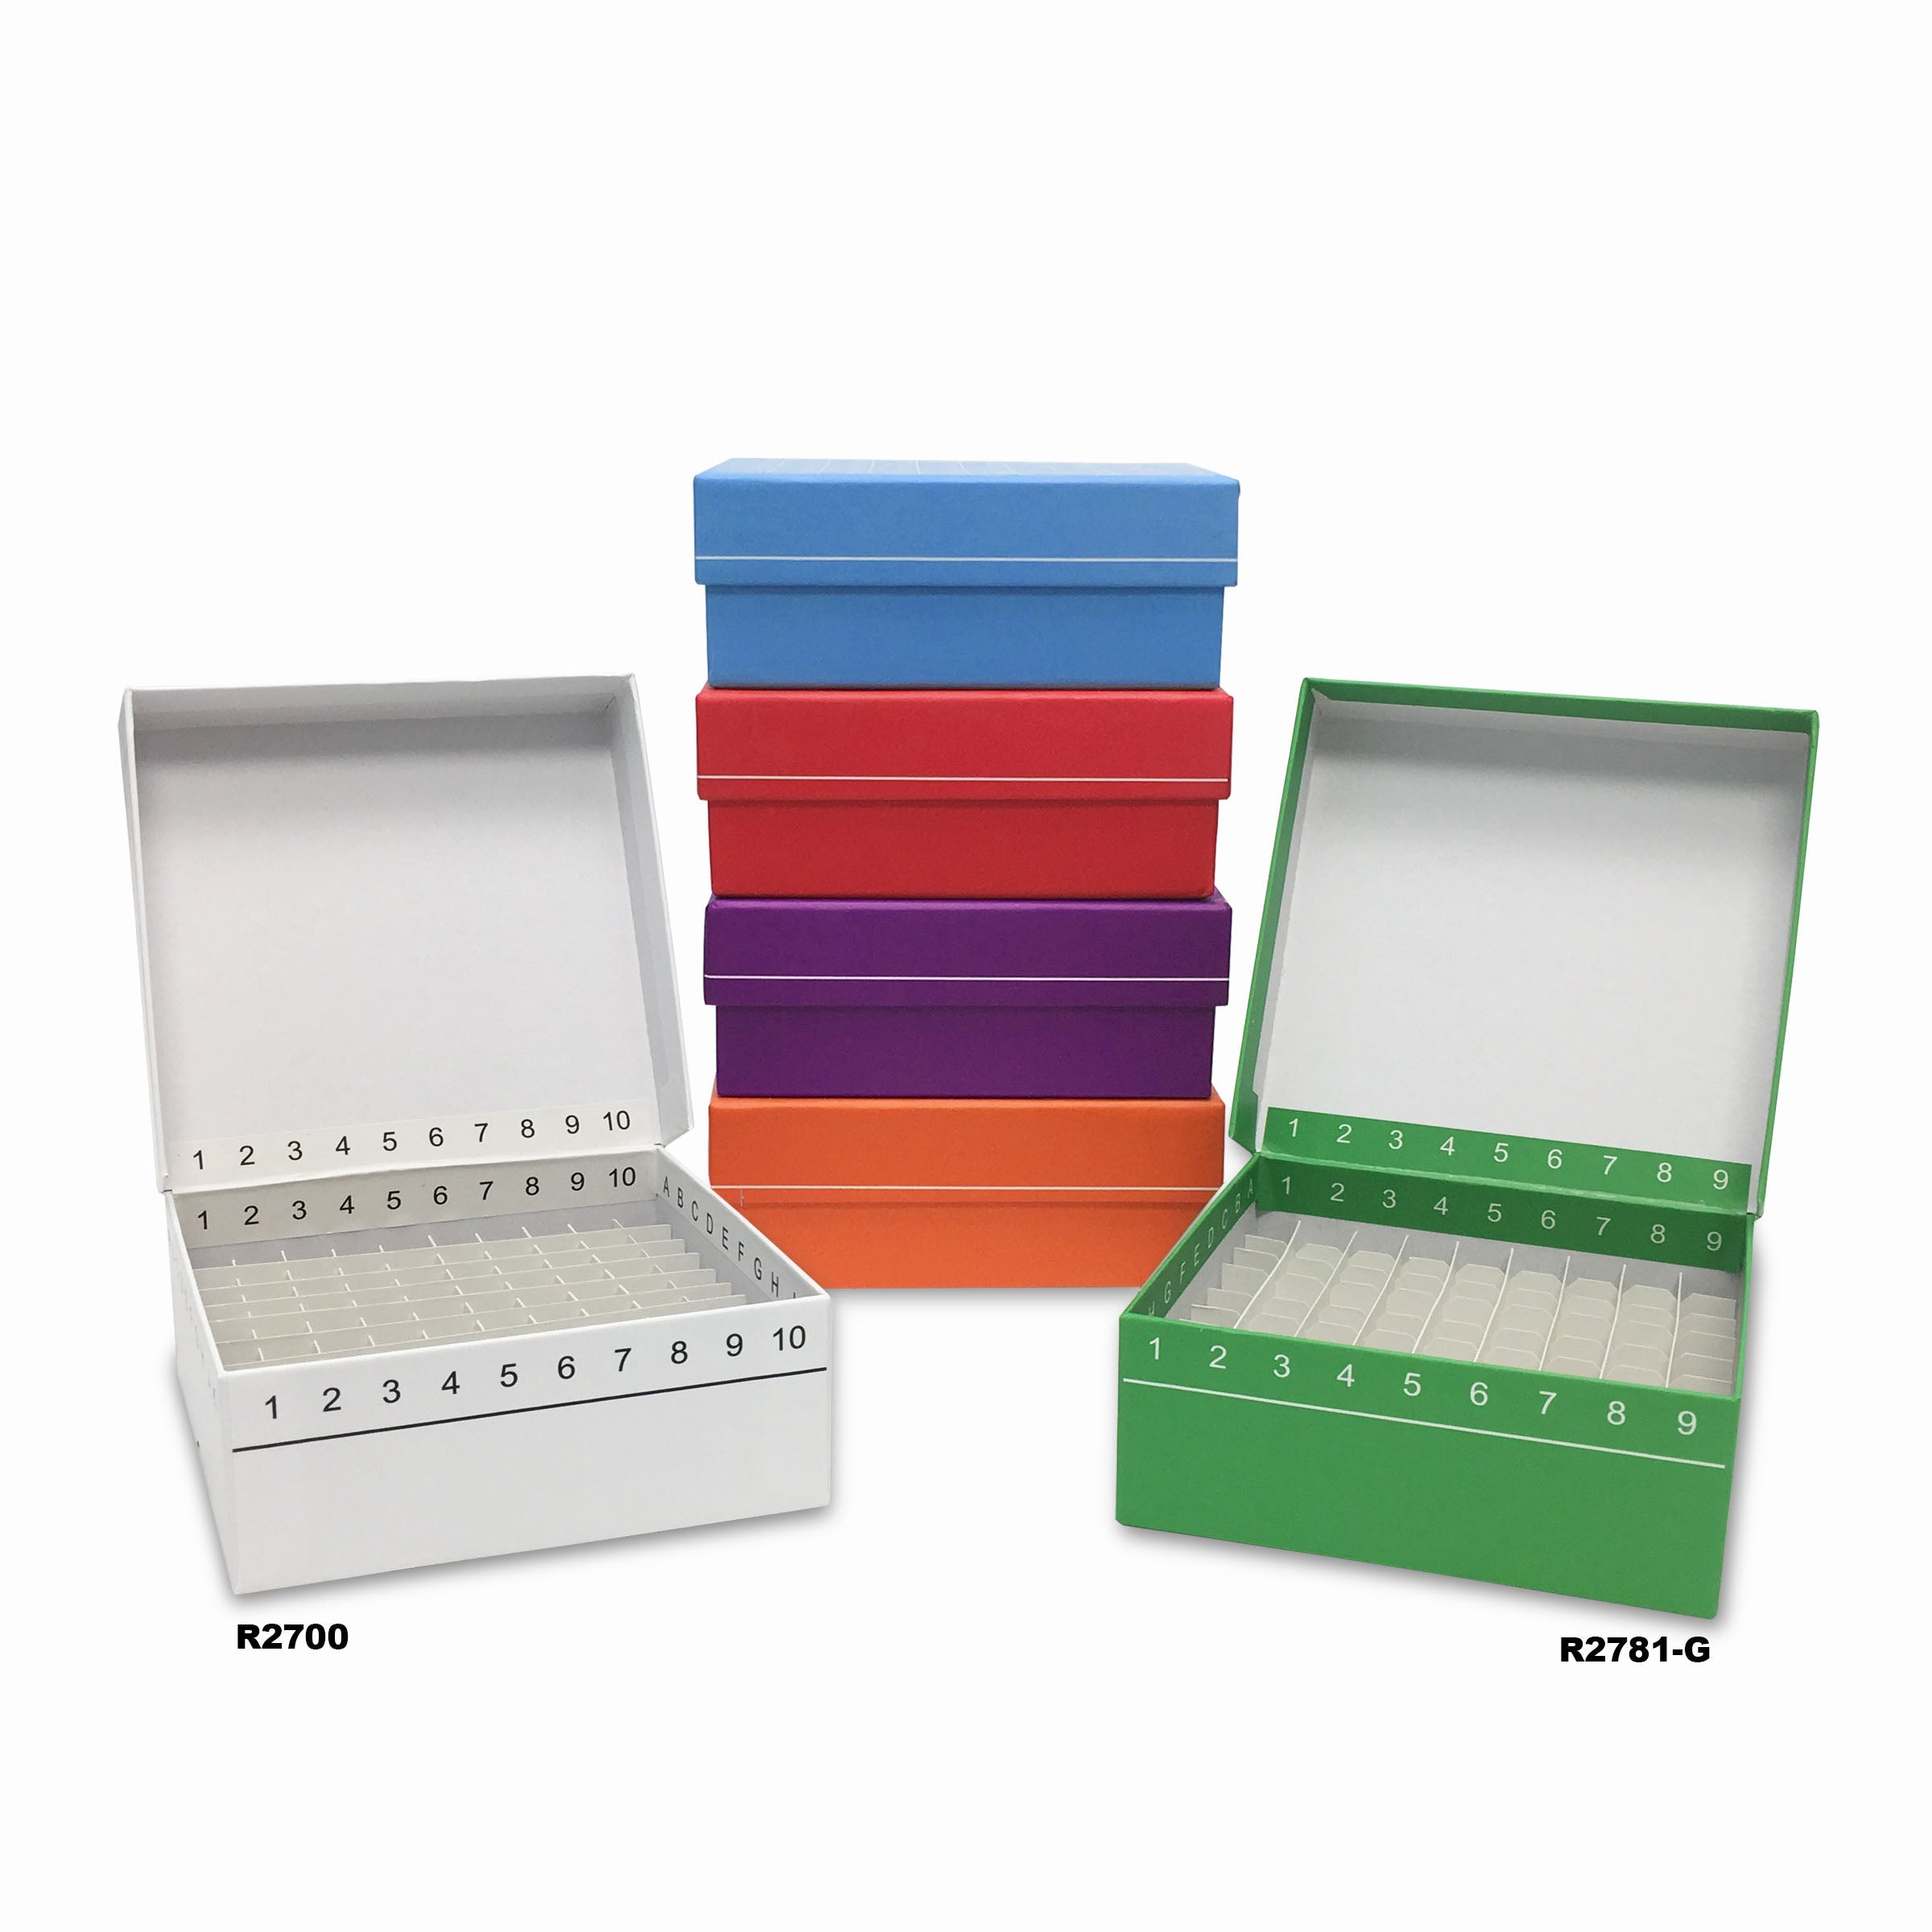 MTC Bio R2781-B, Fliptop Carboard Freezer Box with Attached Hinged Lid, 81-Place, Blue, 5/pk